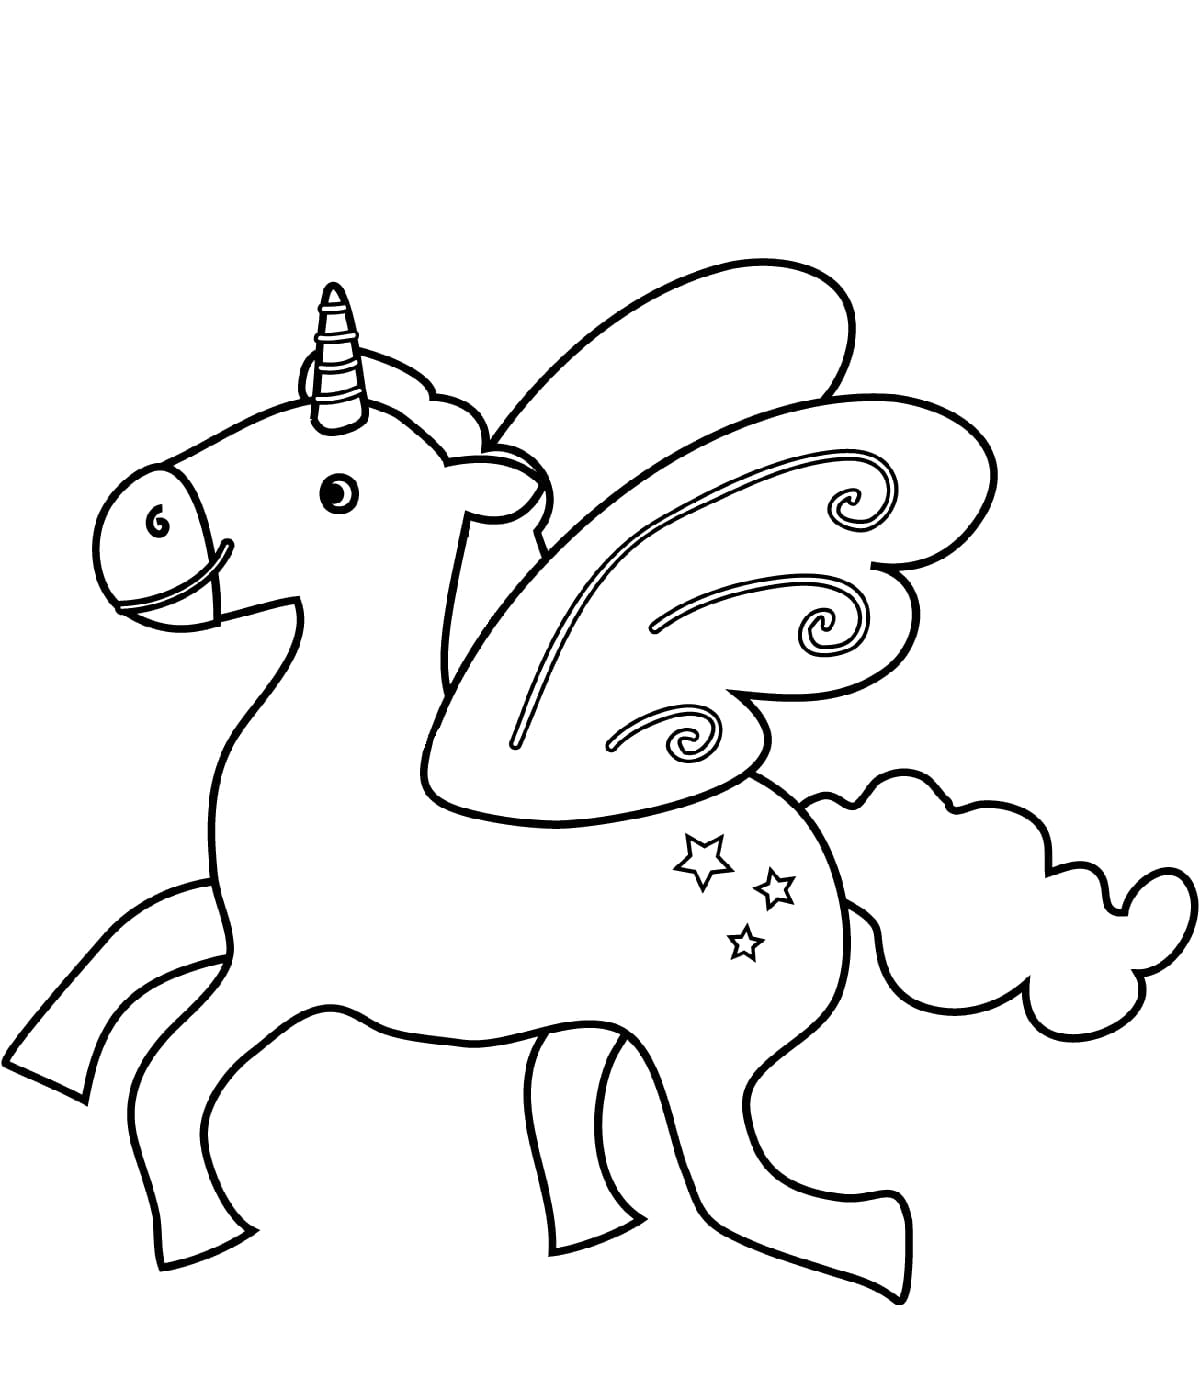 Get Unicorn Among Us Coloring Pages Printable Gif - Coloring Pages